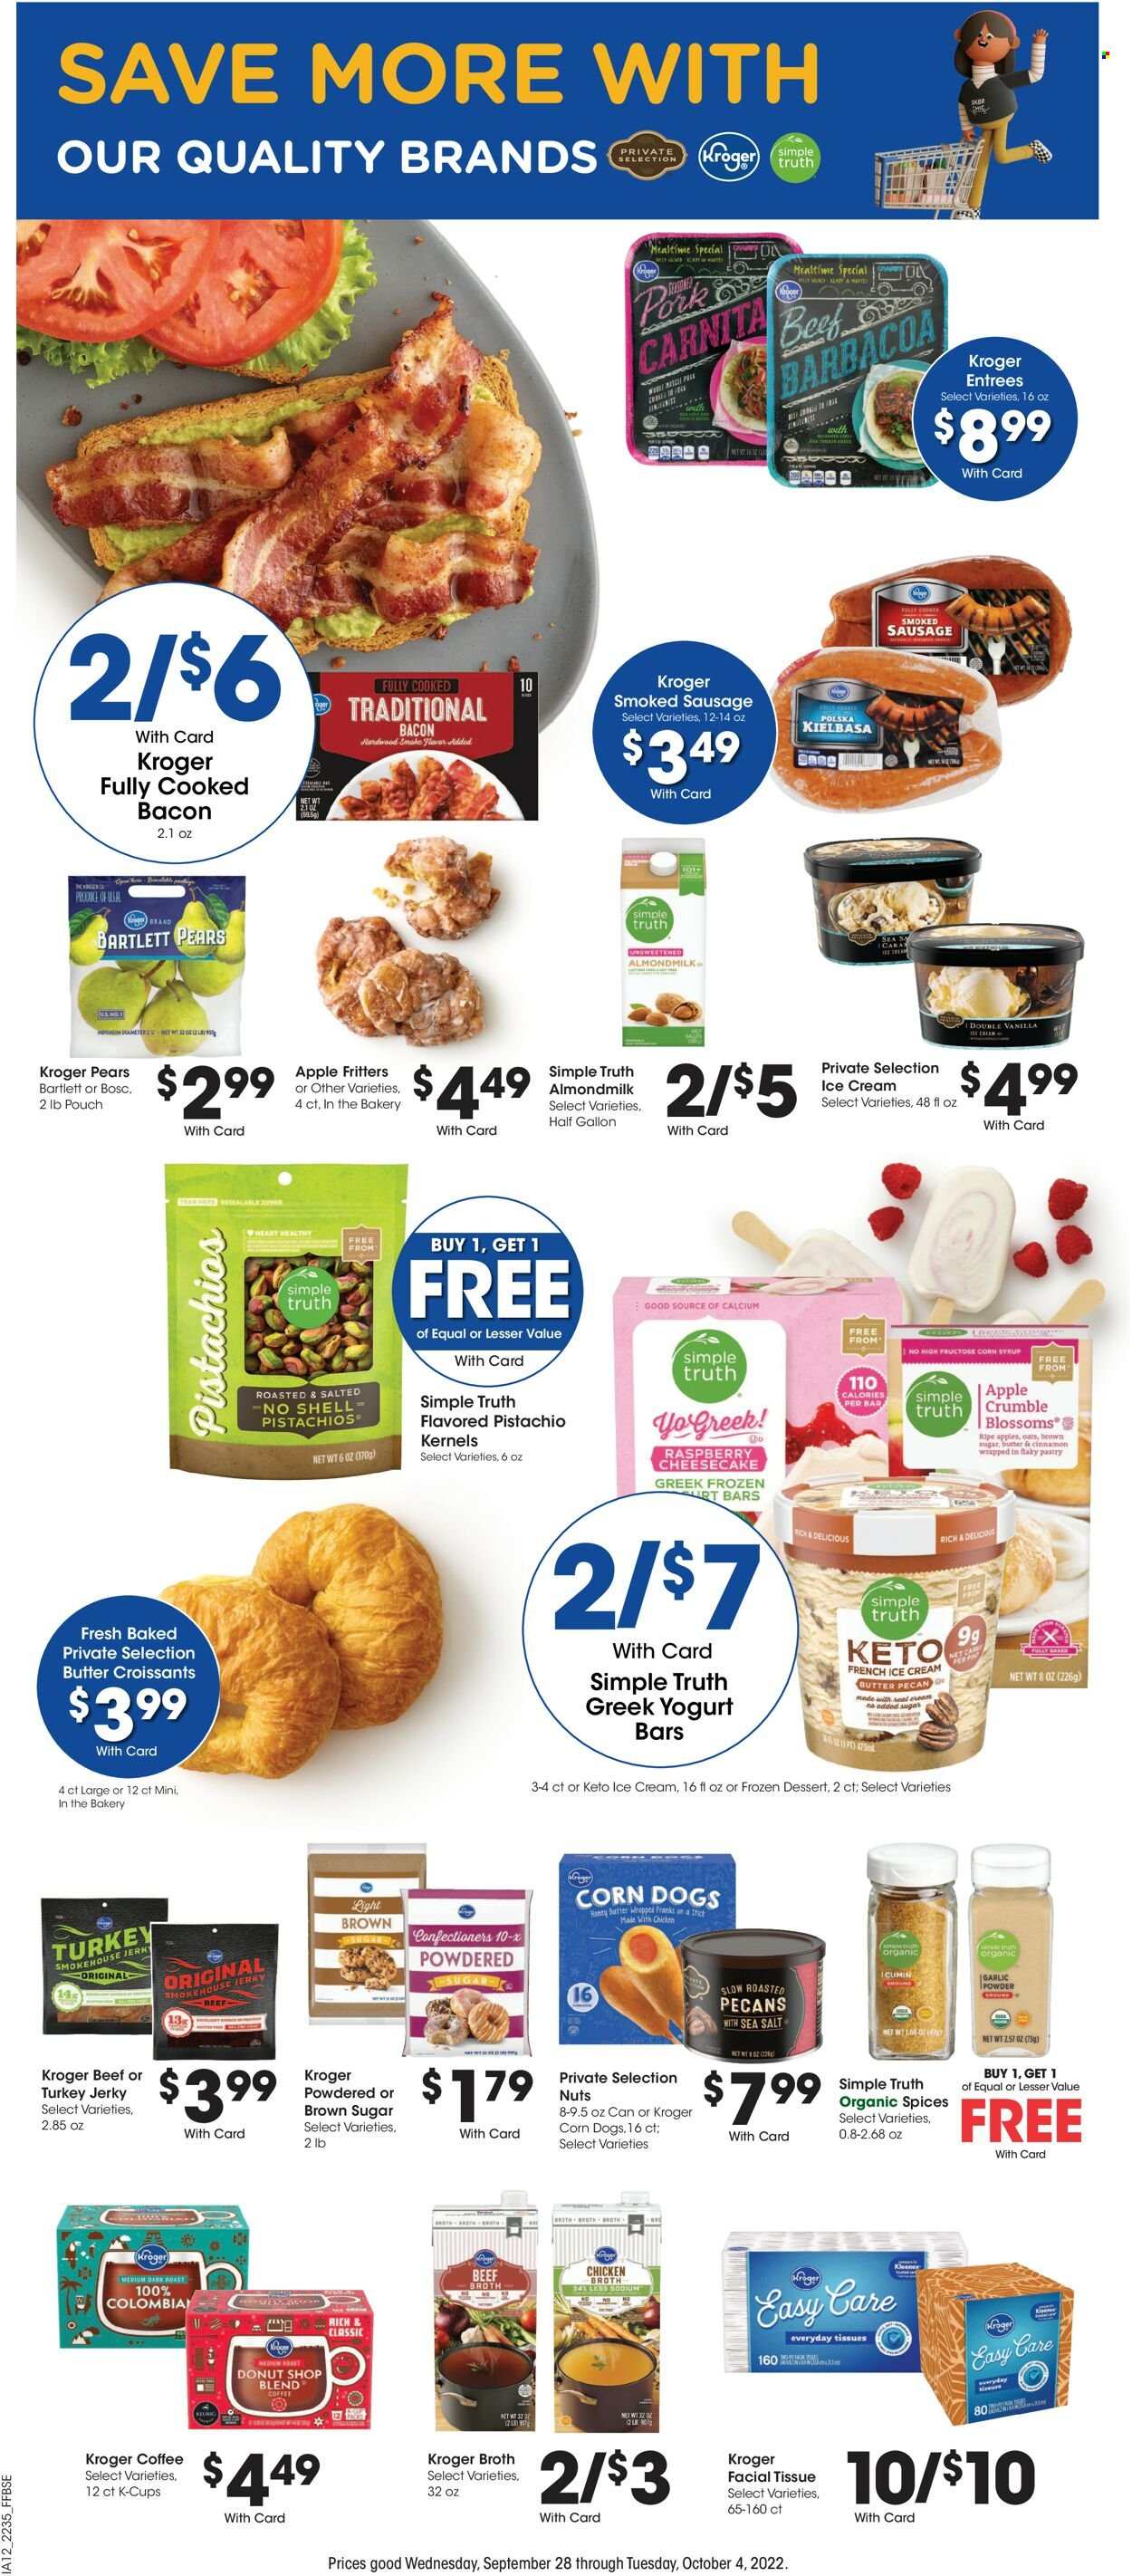 thumbnail - Fry’s Flyer - 09/28/2022 - 10/04/2022 - Sales products - croissant, garlic, apples, Bartlett pears, pears, bacon, jerky, sausage, smoked sausage, kielbasa, greek yoghurt, almond milk, ice cream, Enlightened lce Cream, beef broth, chicken broth, icing sugar, broth, cinnamon, corn syrup, honey, syrup, pecans, pistachios, coffee, coffee capsules, K-Cups, tissues. Page 8.